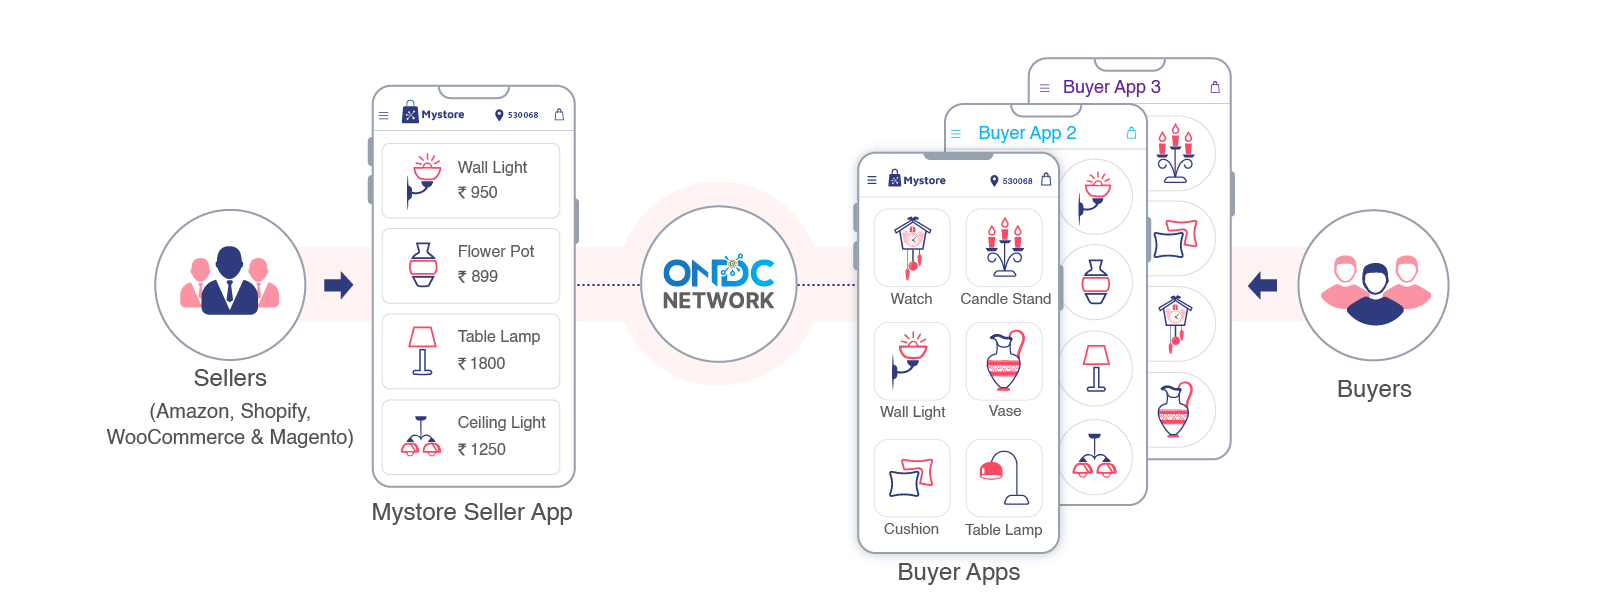 How ONDC Network works for Ecommerce Merchants selling on different digital platforms